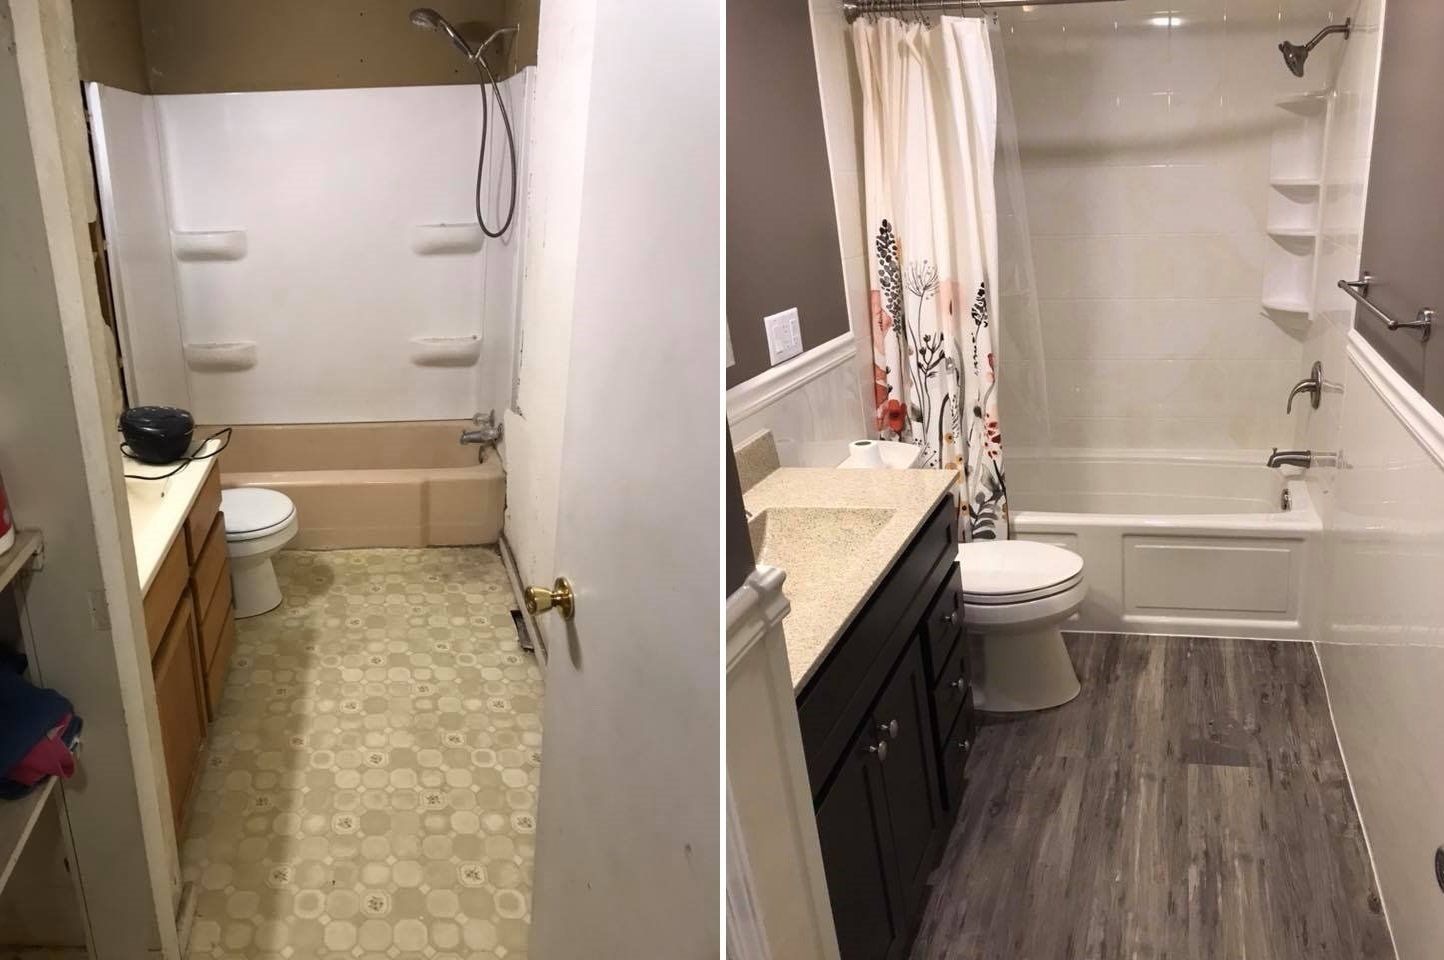 Before & After (Tub, Walls, Vanity tops & Cabinets, Floors, Wainscoting & Toilet)